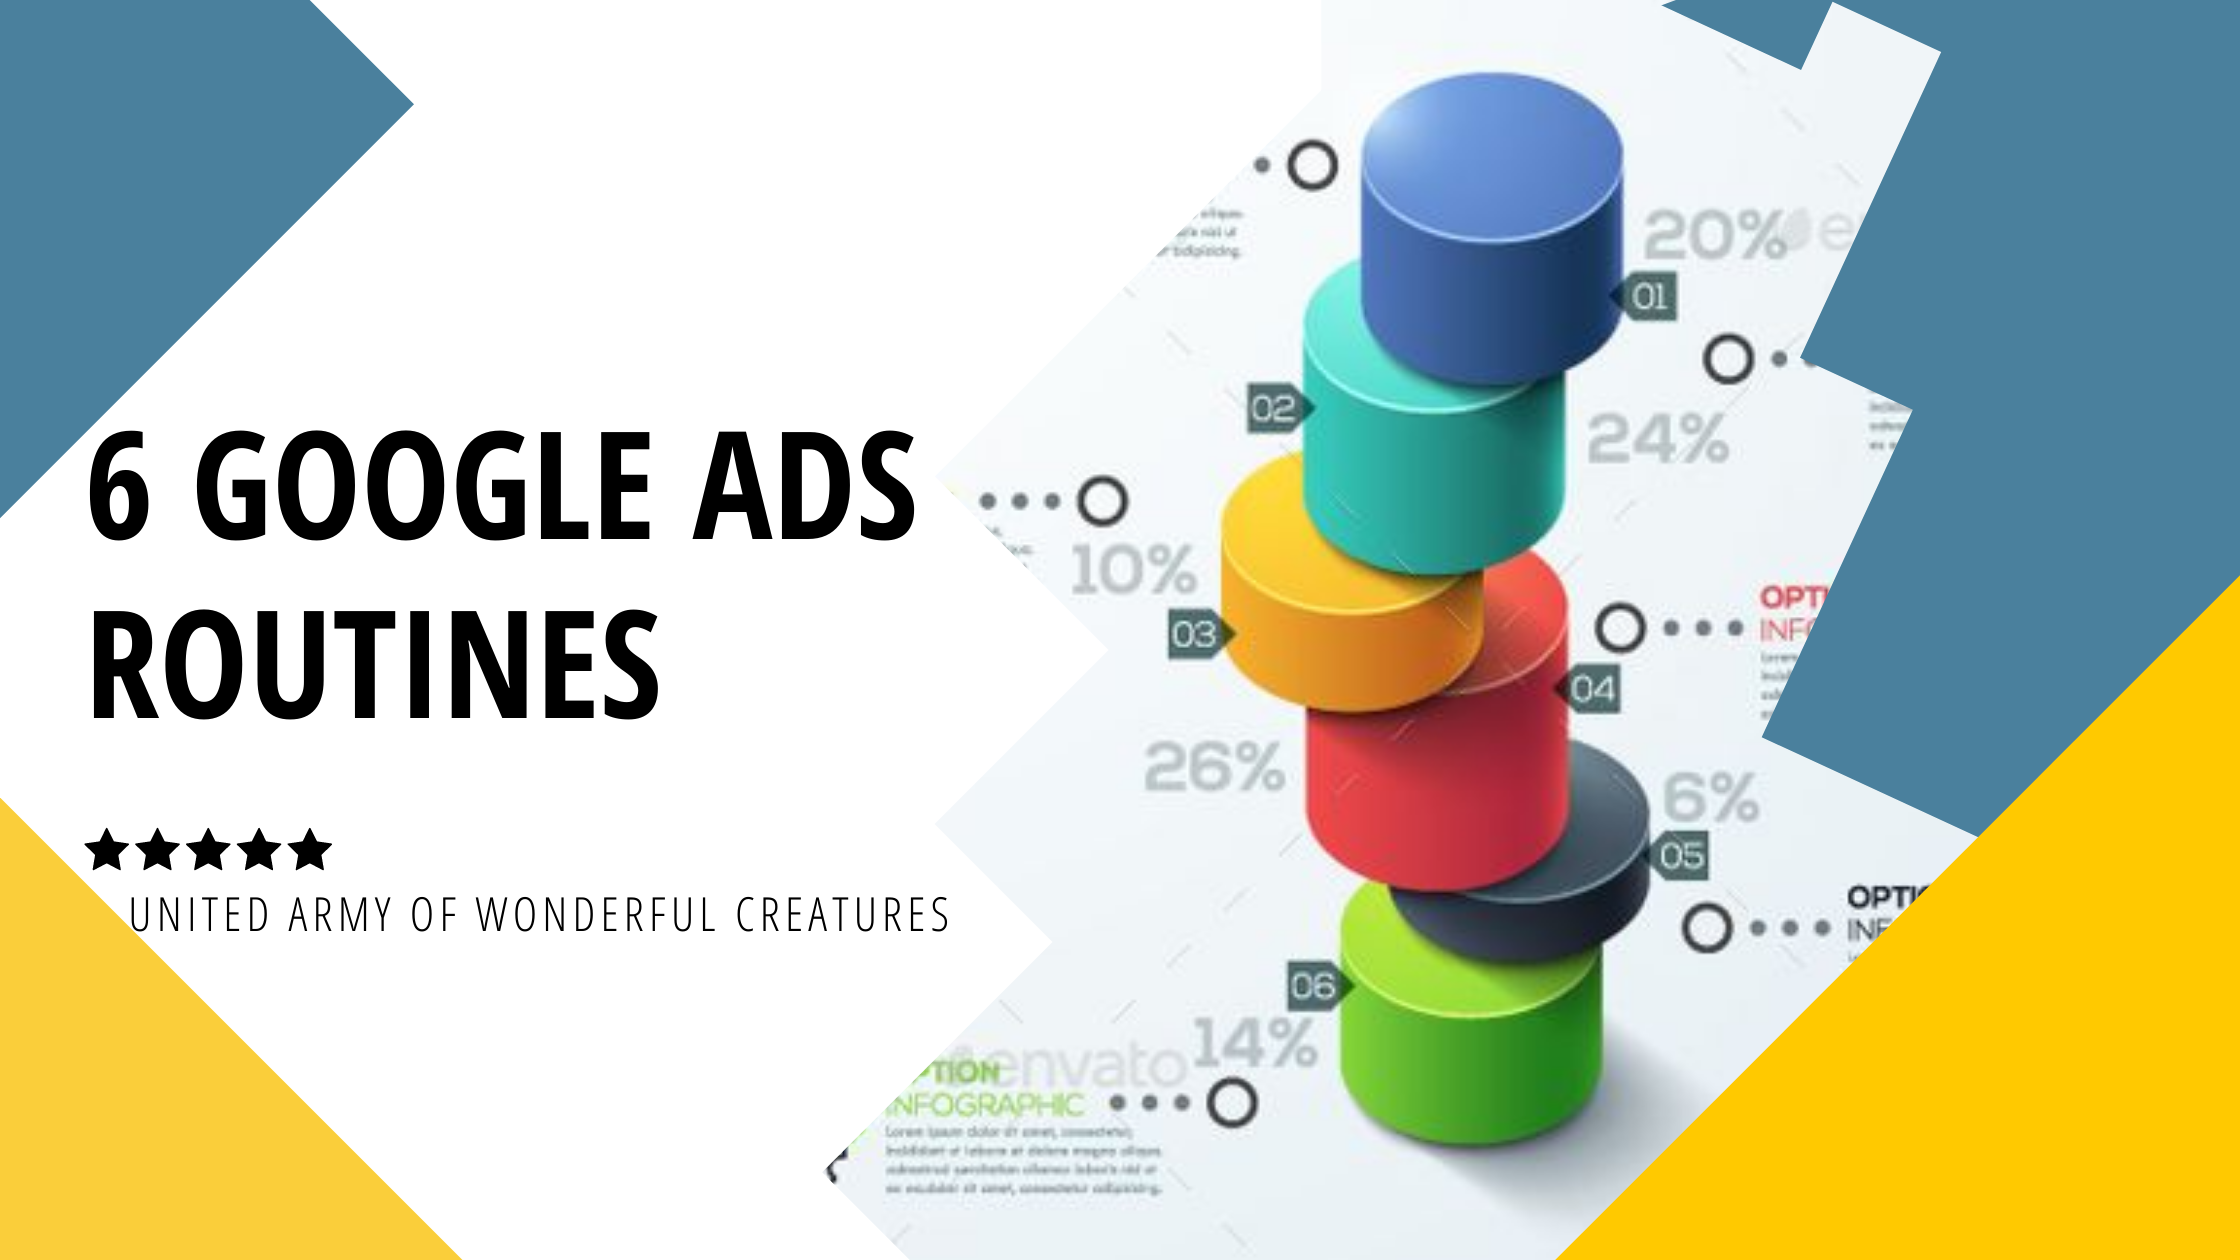 6 Google Ads Optimization Routines That will Help You Win the Month